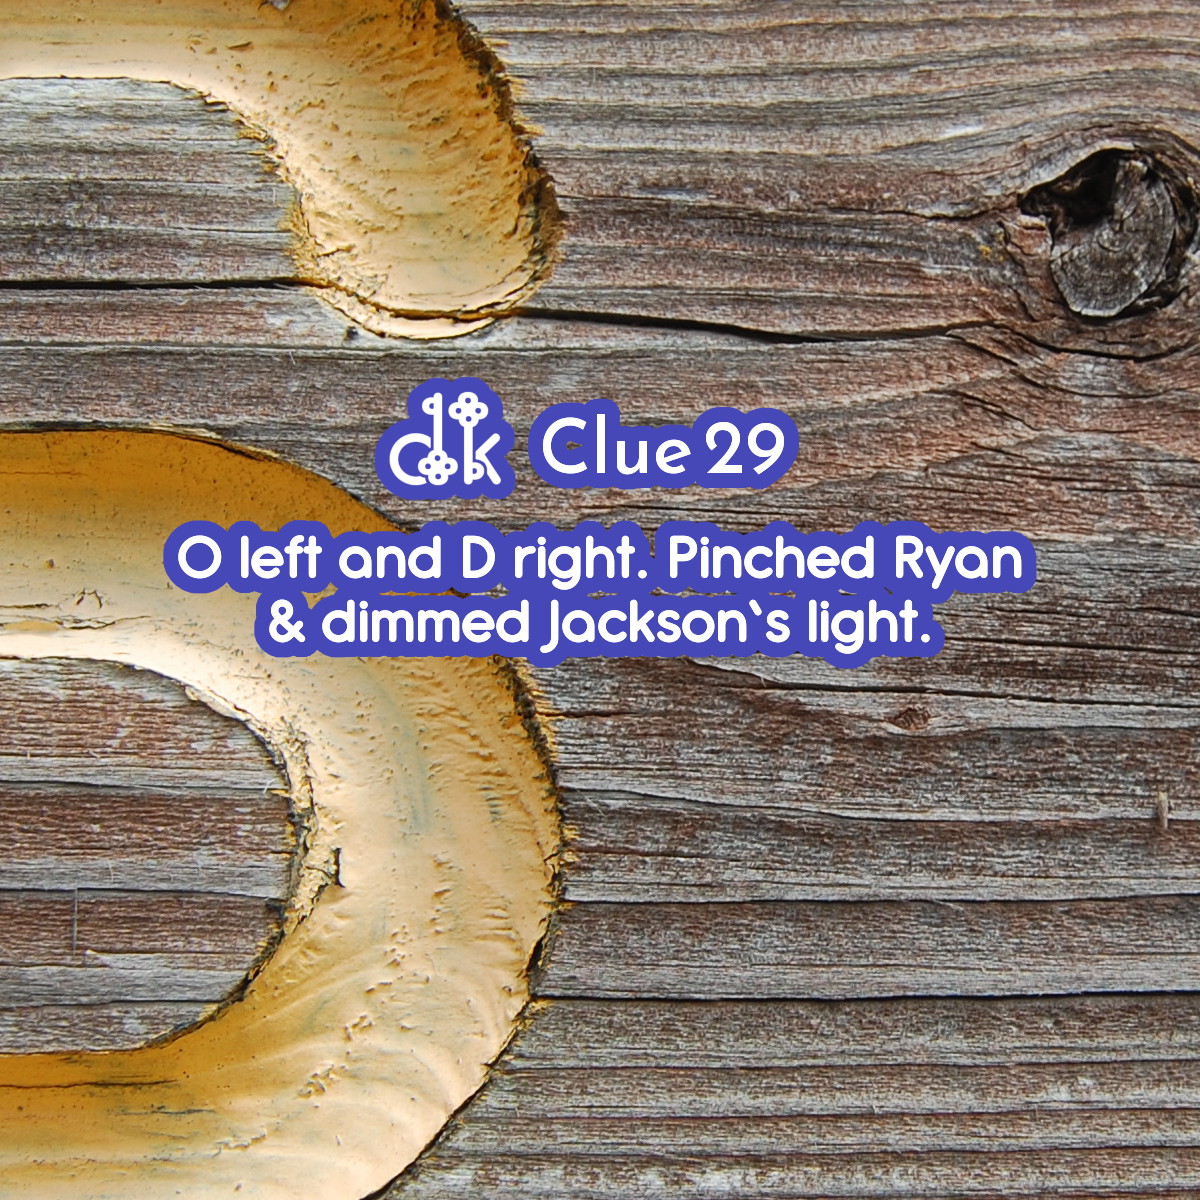 Clue #29 - O left and D right. Pinched Ryan & dimmed Jackson's light.